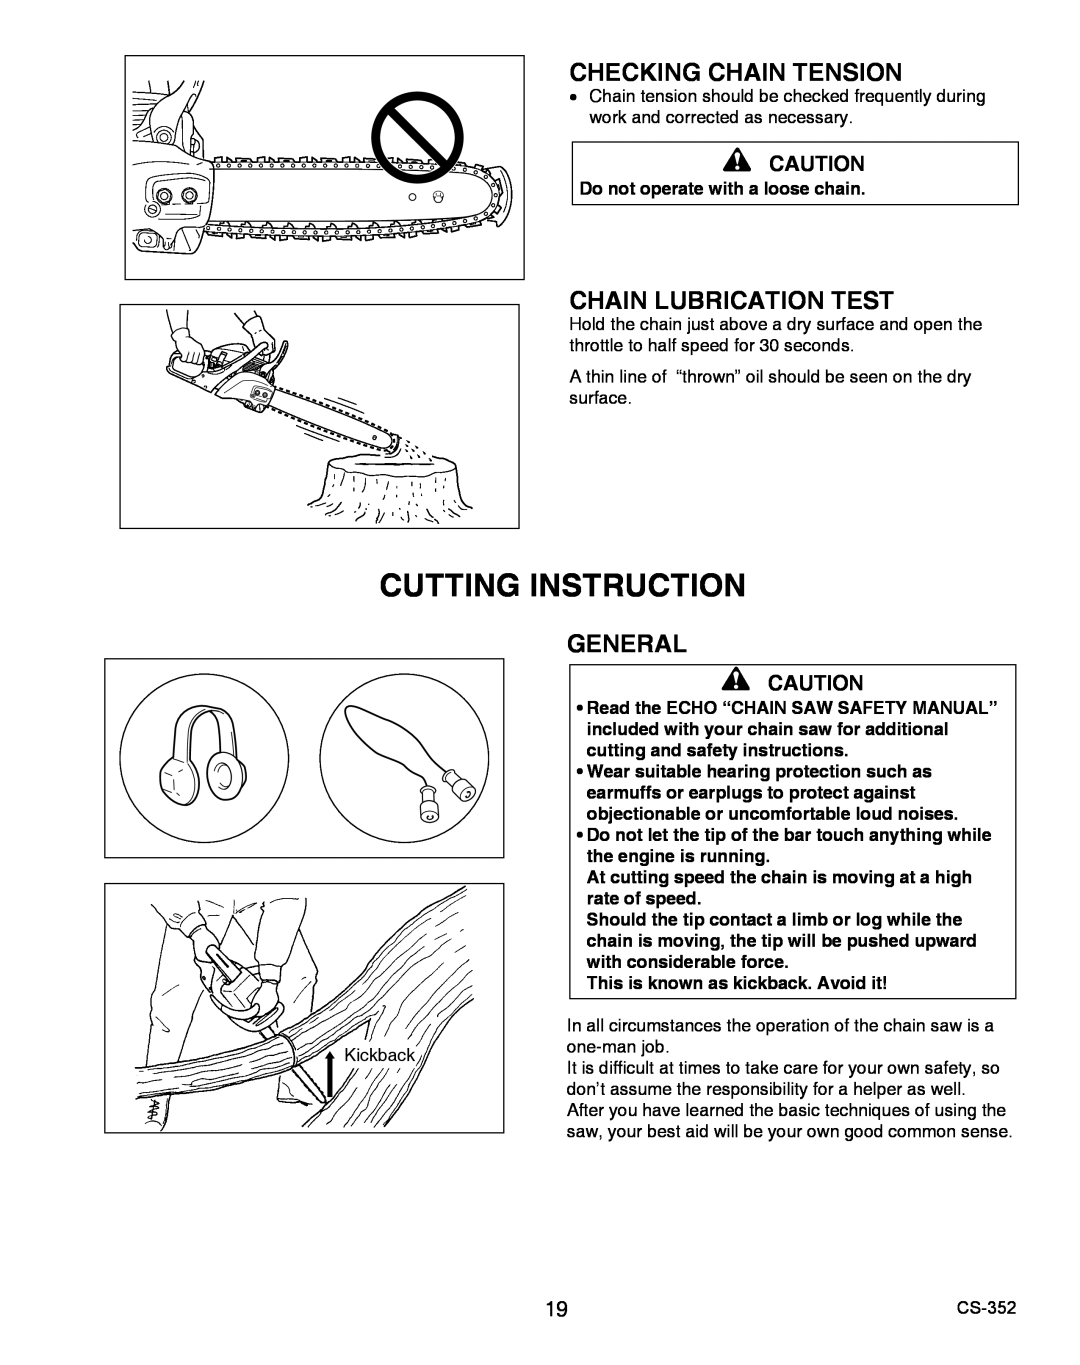 Echo X750020201 instruction manual Cutting Instruction, Checking Chain Tension, Chain Lubrication Test, General 